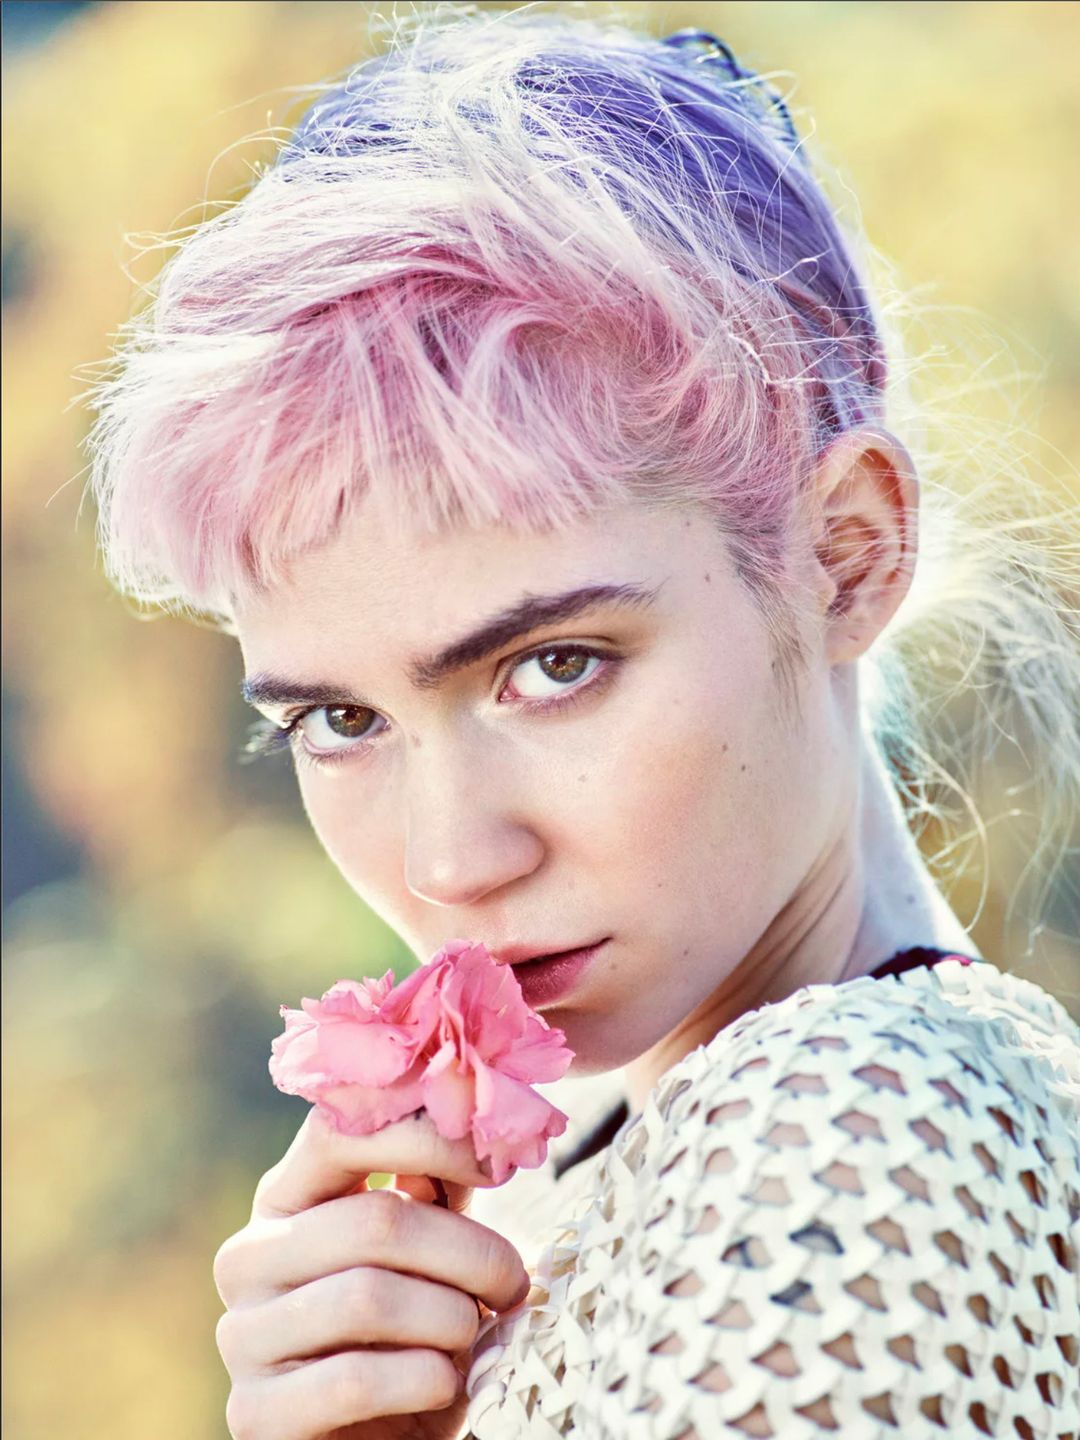 Grimes love story